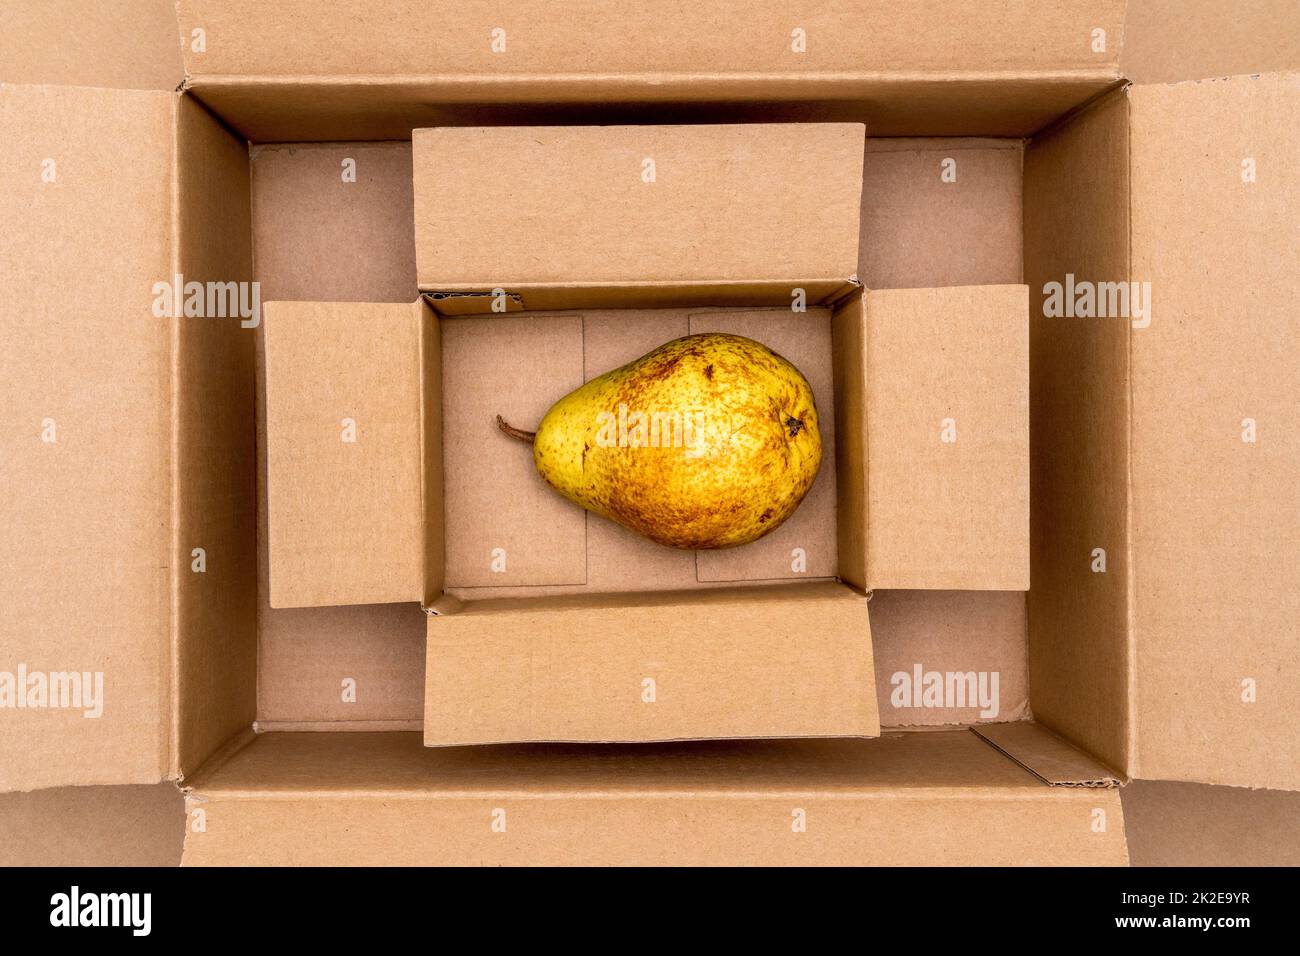 One pear in a box Stock Photo